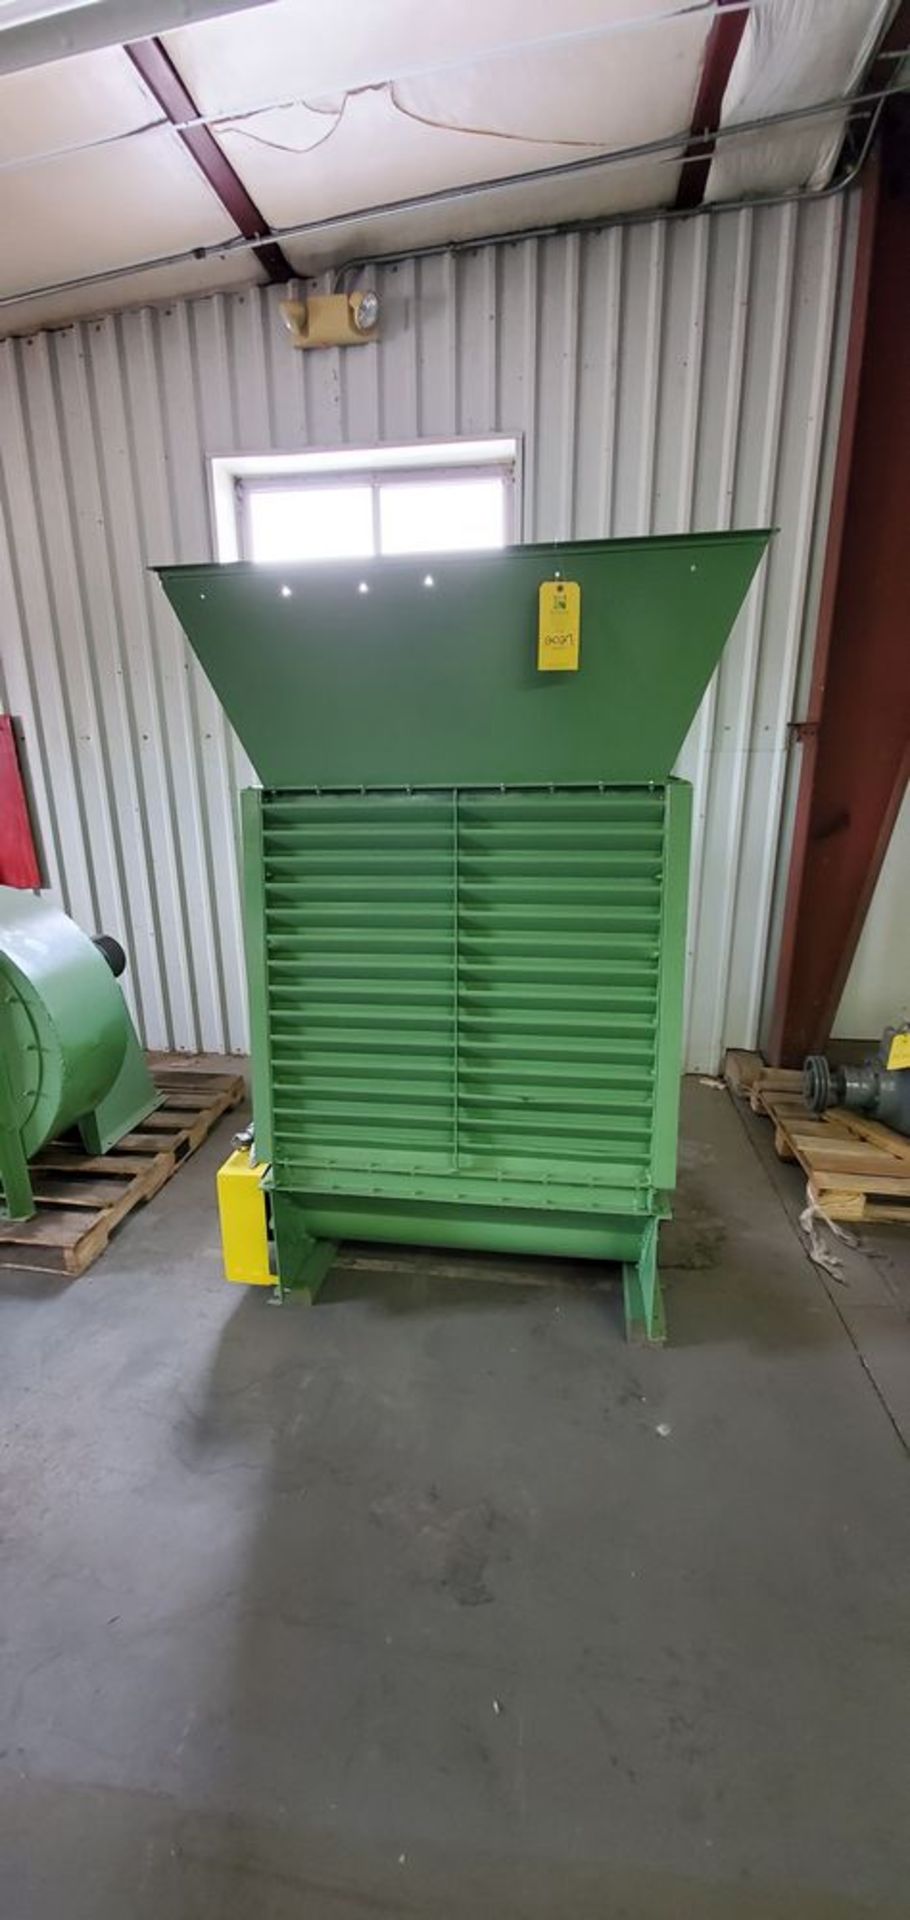 Located in Canon City, CO -- CPM cooler, Model 1B single stage vertical cooler SN 154499 upadated